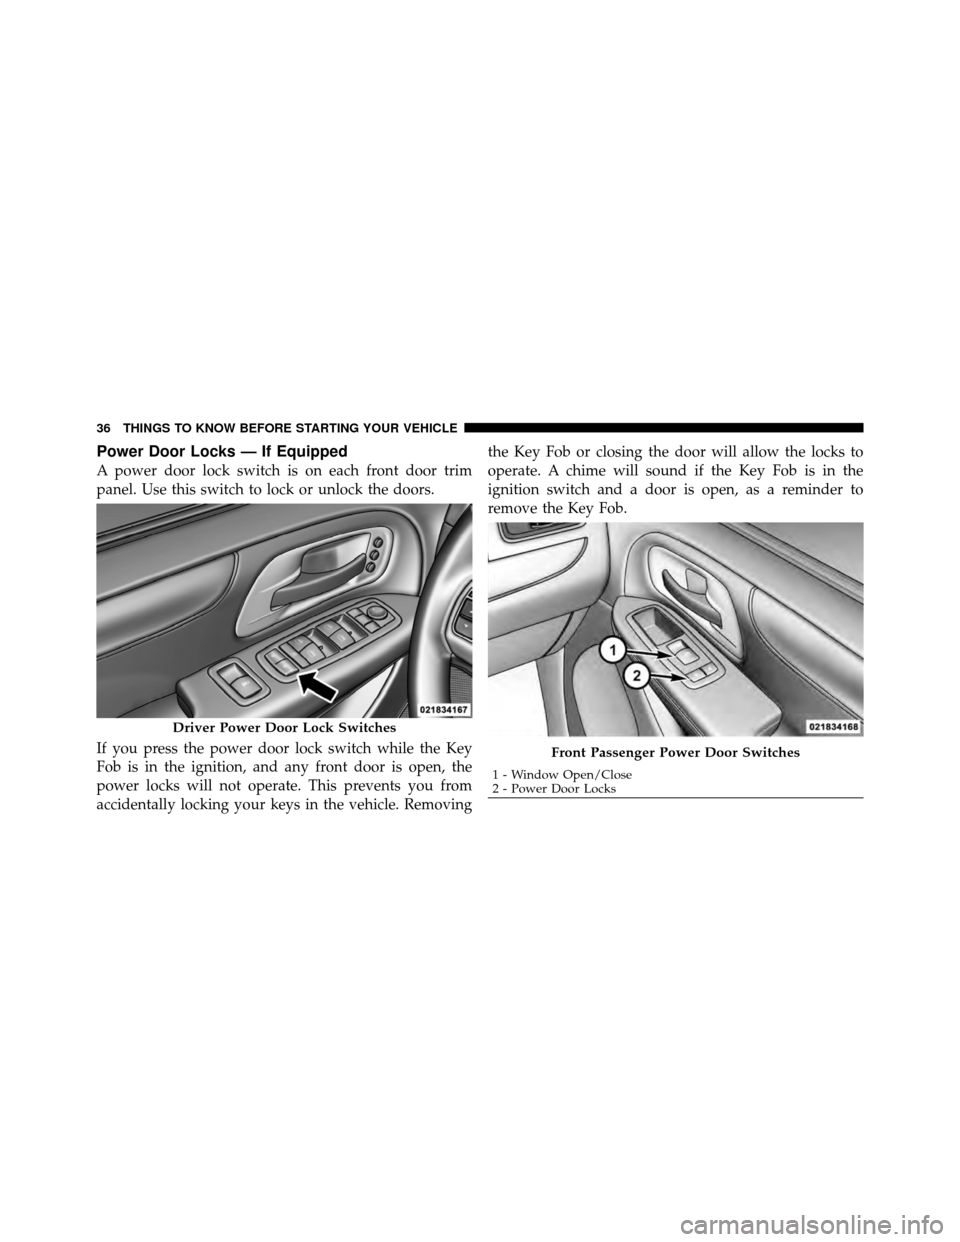 CHRYSLER TOWN AND COUNTRY 2012 5.G Owners Guide Power Door Locks — If Equipped
A power door lock switch is on each front door trim
panel. Use this switch to lock or unlock the doors.
If you press the power door lock switch while the Key
Fob is in